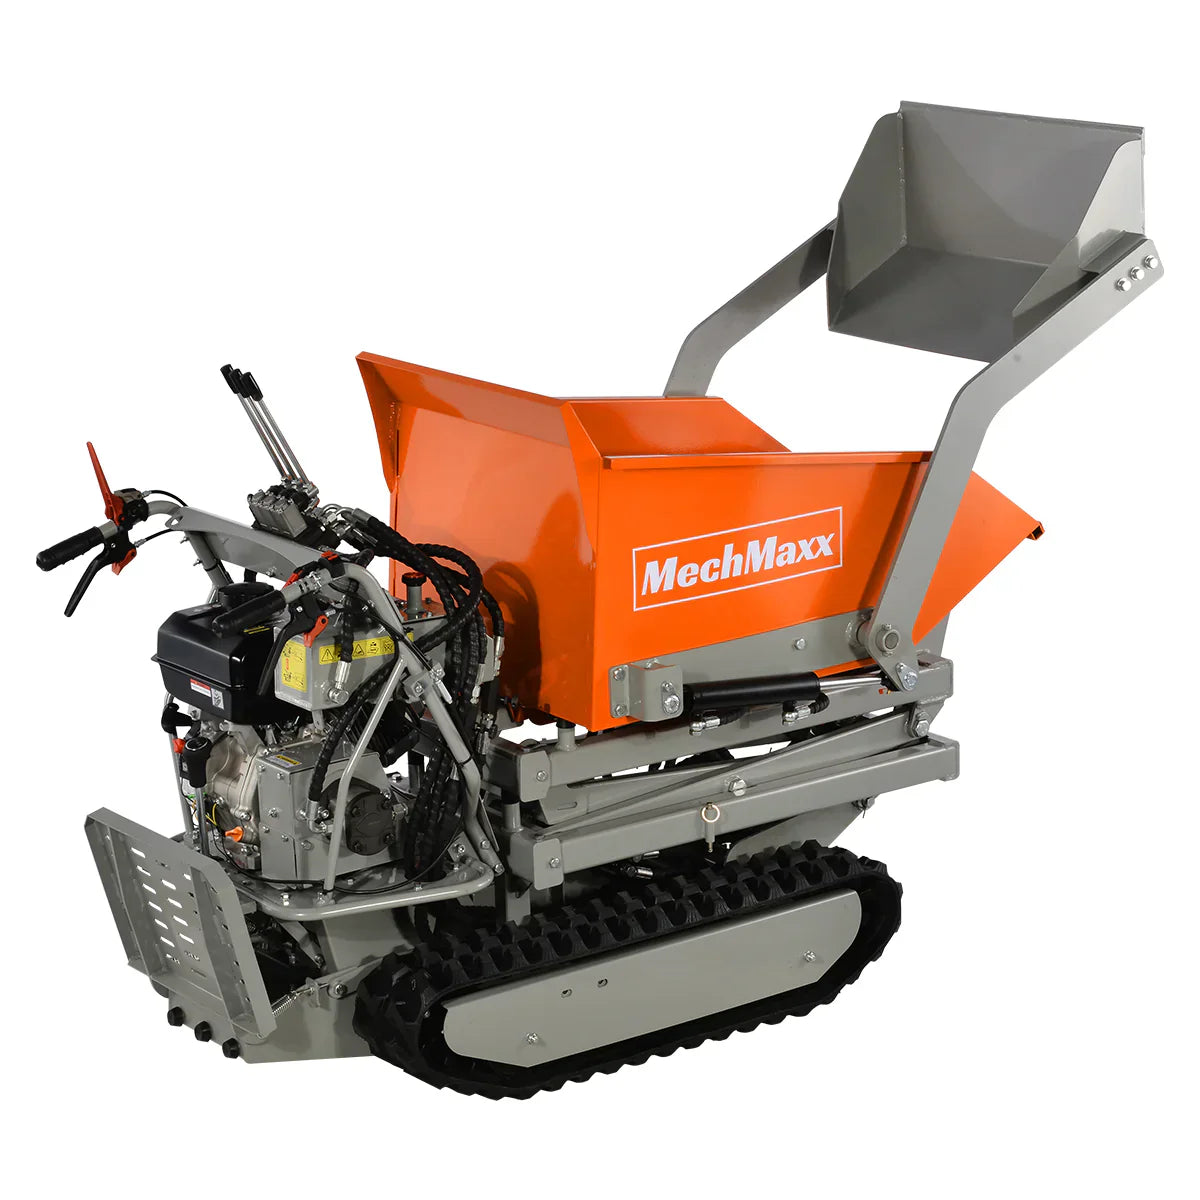 1100lbs Capacity 10HP 301cc Gas Engine Tracked Dumper Hydraulic Tipping and Lifting with Front Shovel